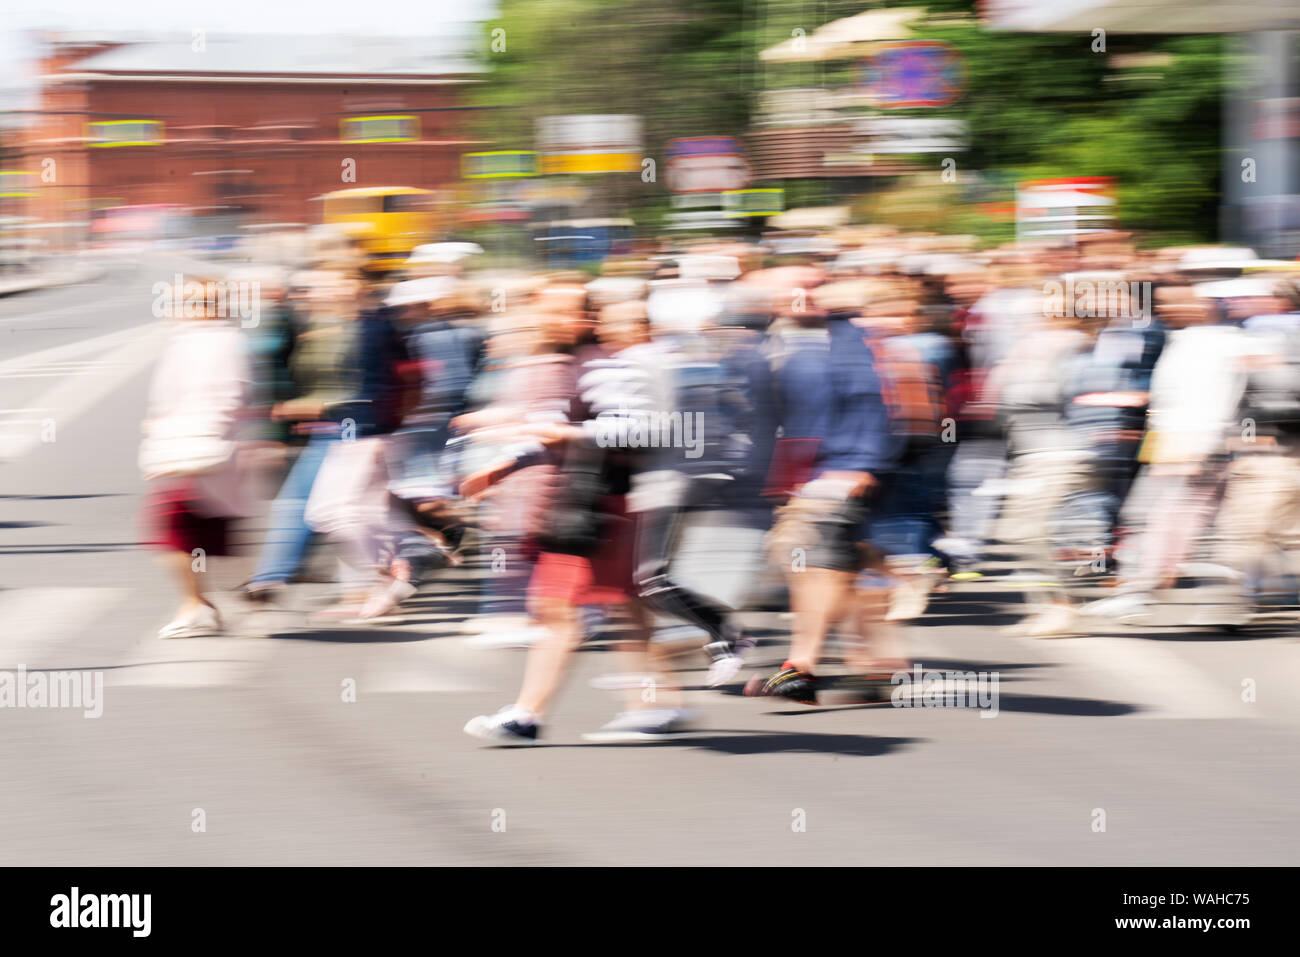 Blured crowd of people walking on the busy city street. Motion blured people. Slow shutter speed. People silhouette on the street. Stock Photo